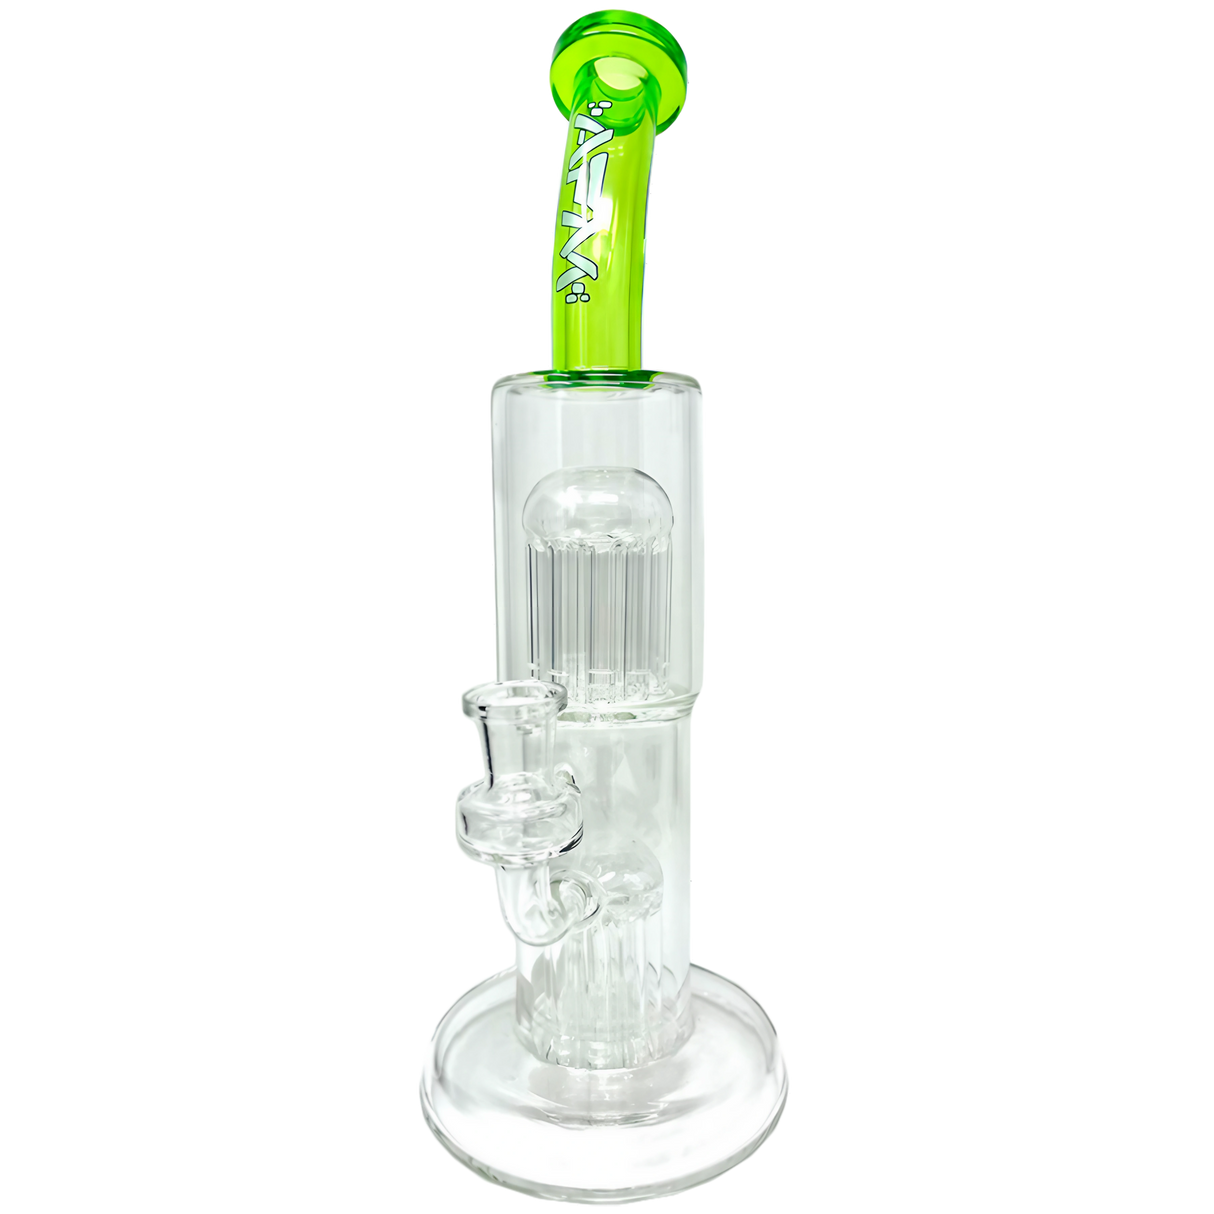 AFM Double Cosmos Rig 12" with clear borosilicate glass and green accents, featuring percolator and recycler design